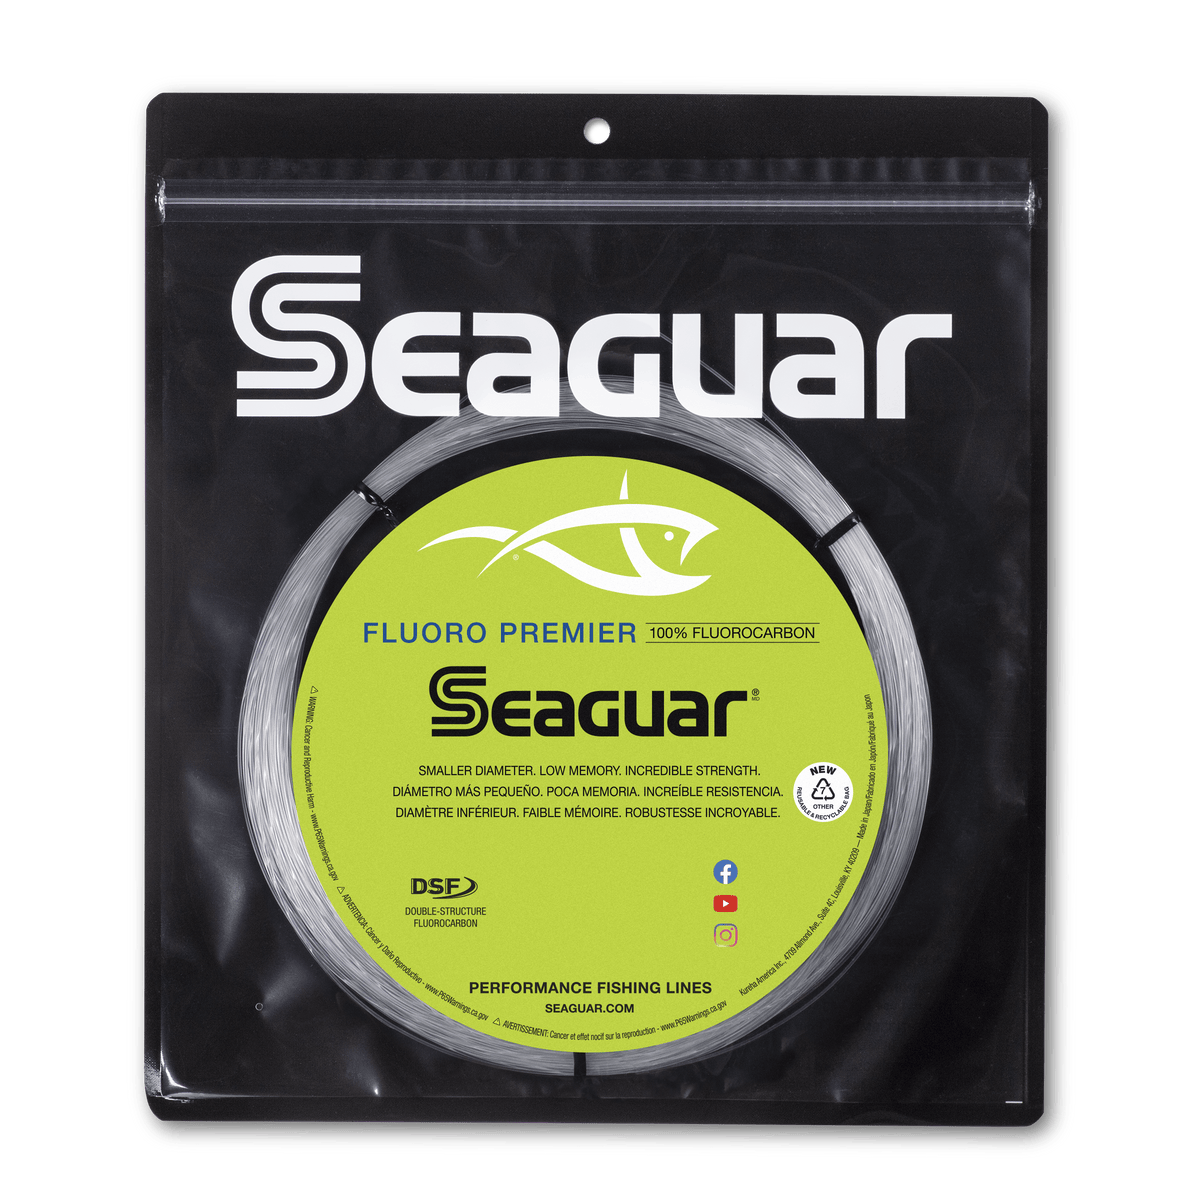 Seaguar 06RM1000 Red Label Clear Fluorocarbon Fishing Line - 6LB 1000 Yard